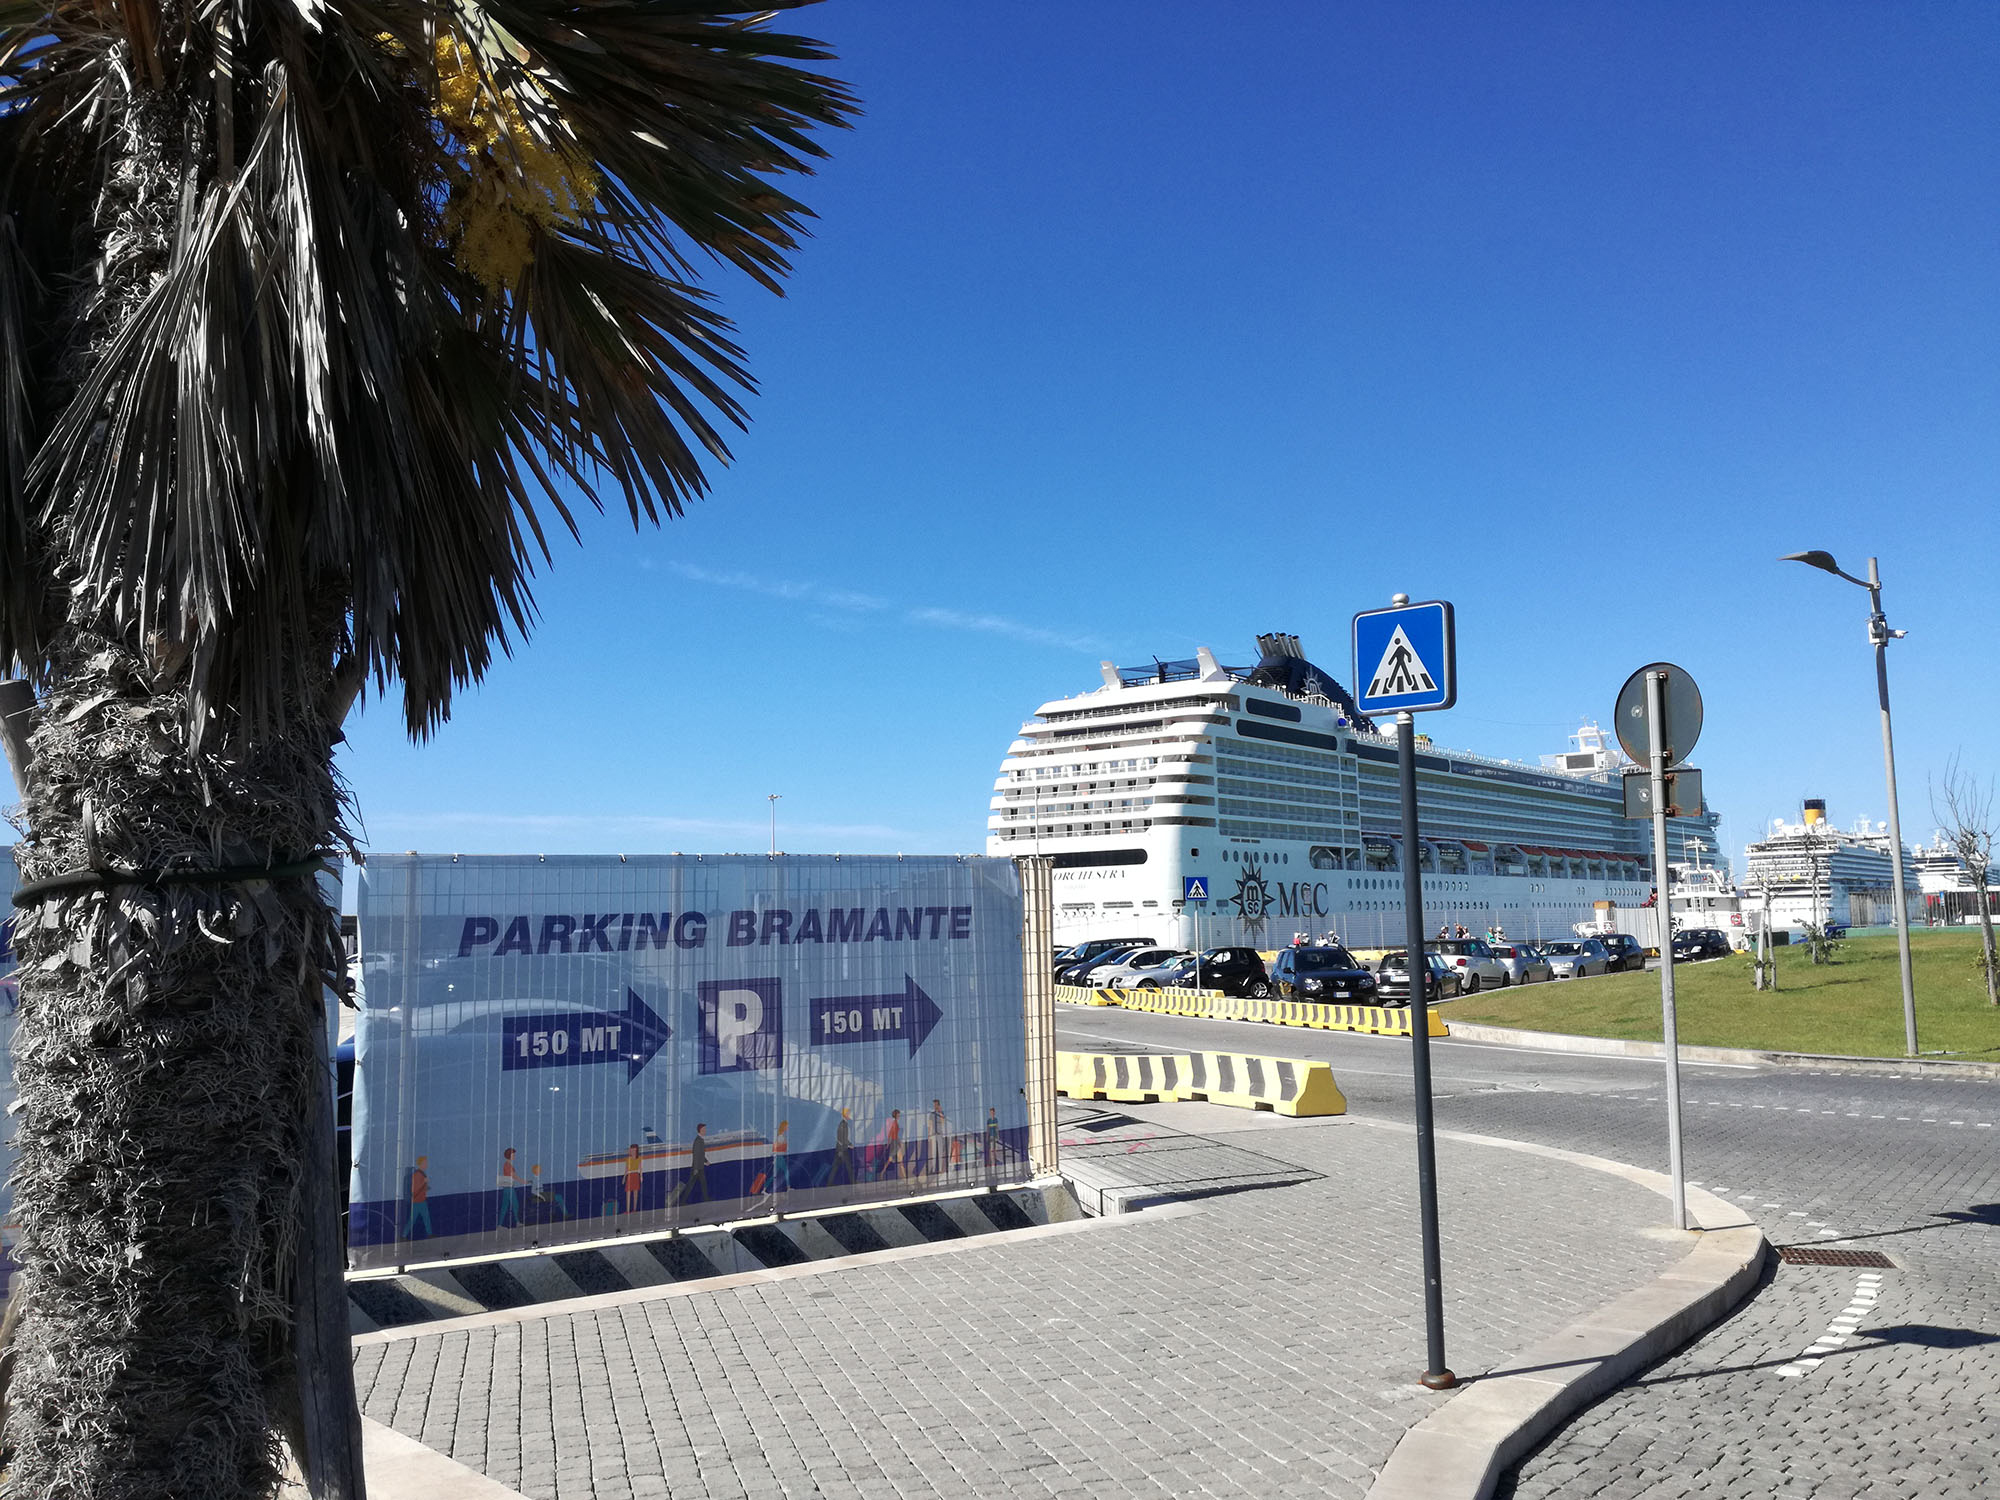 The parking lot Bramante in the port of Civitavecchia is a few meters away from cruise ships